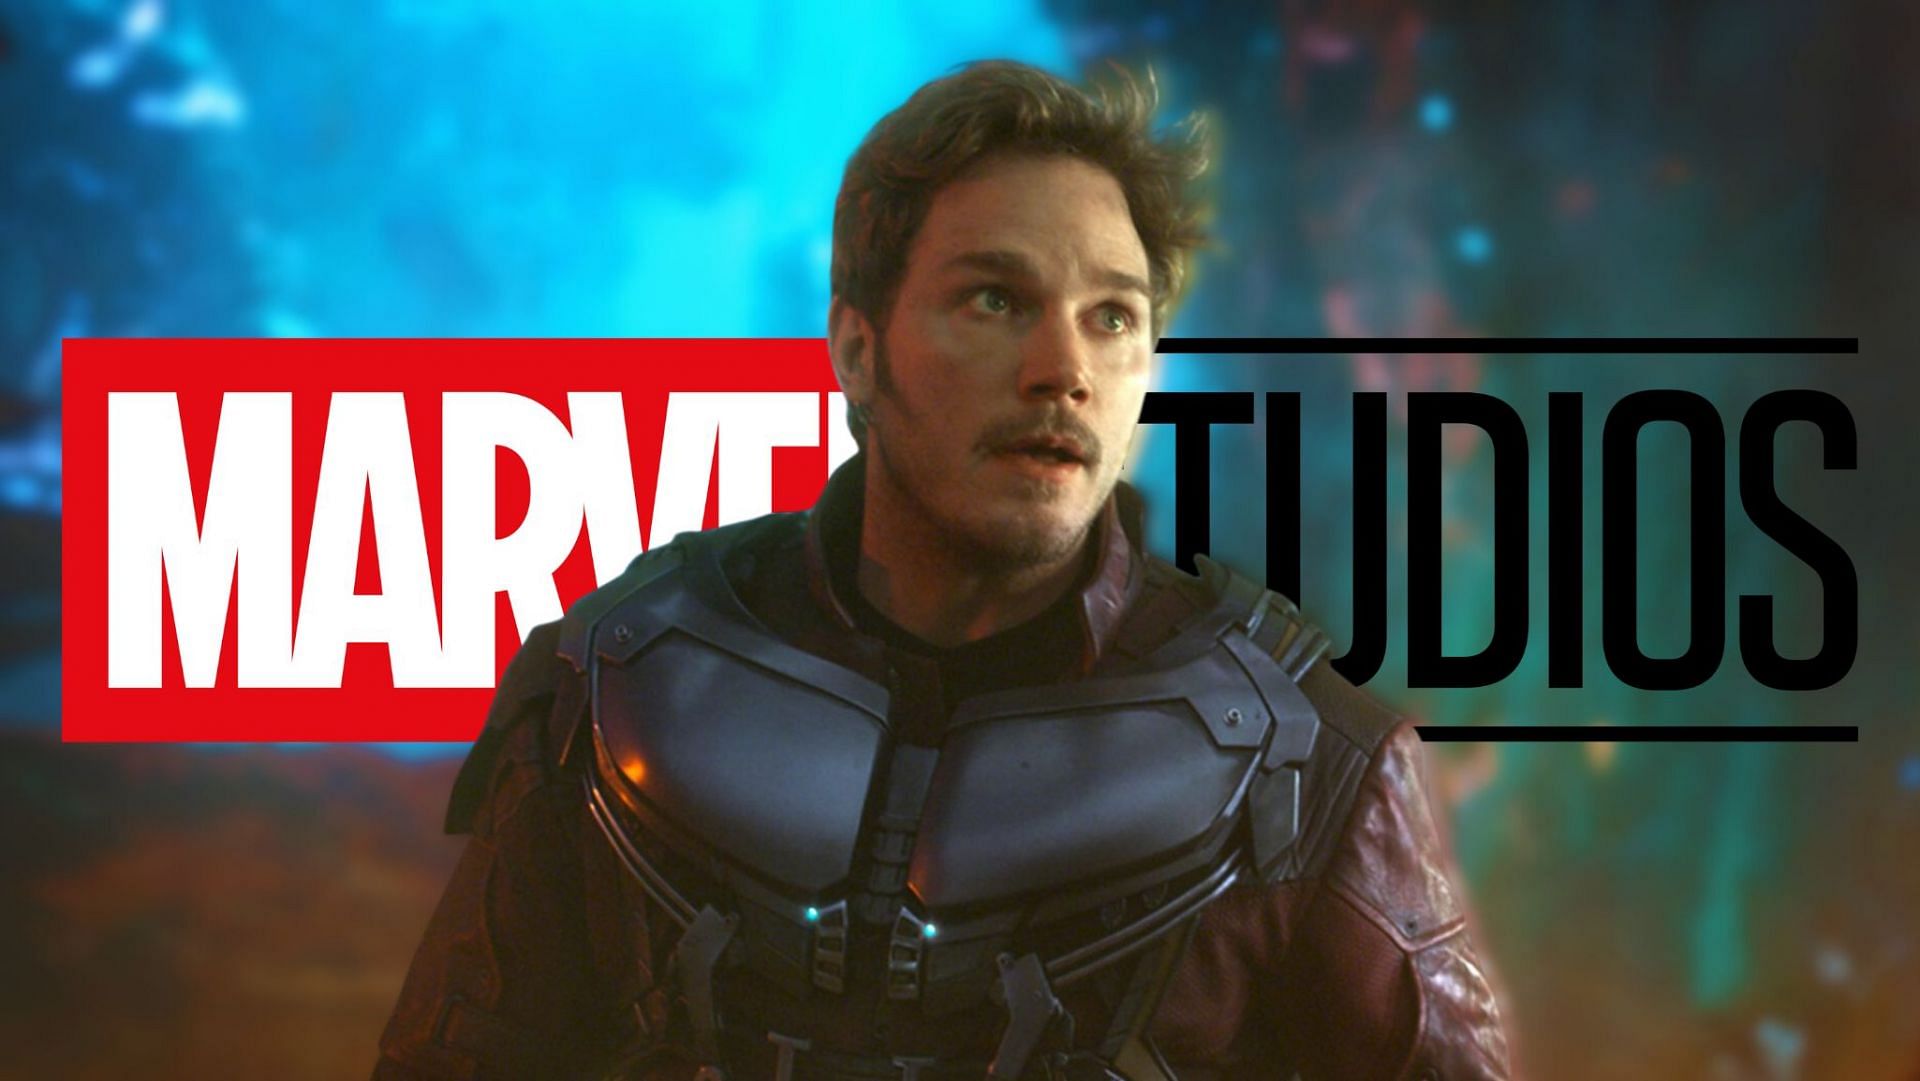 Guardians of the Galaxy Vol. 3 Shows What Marvel Has Been Missing